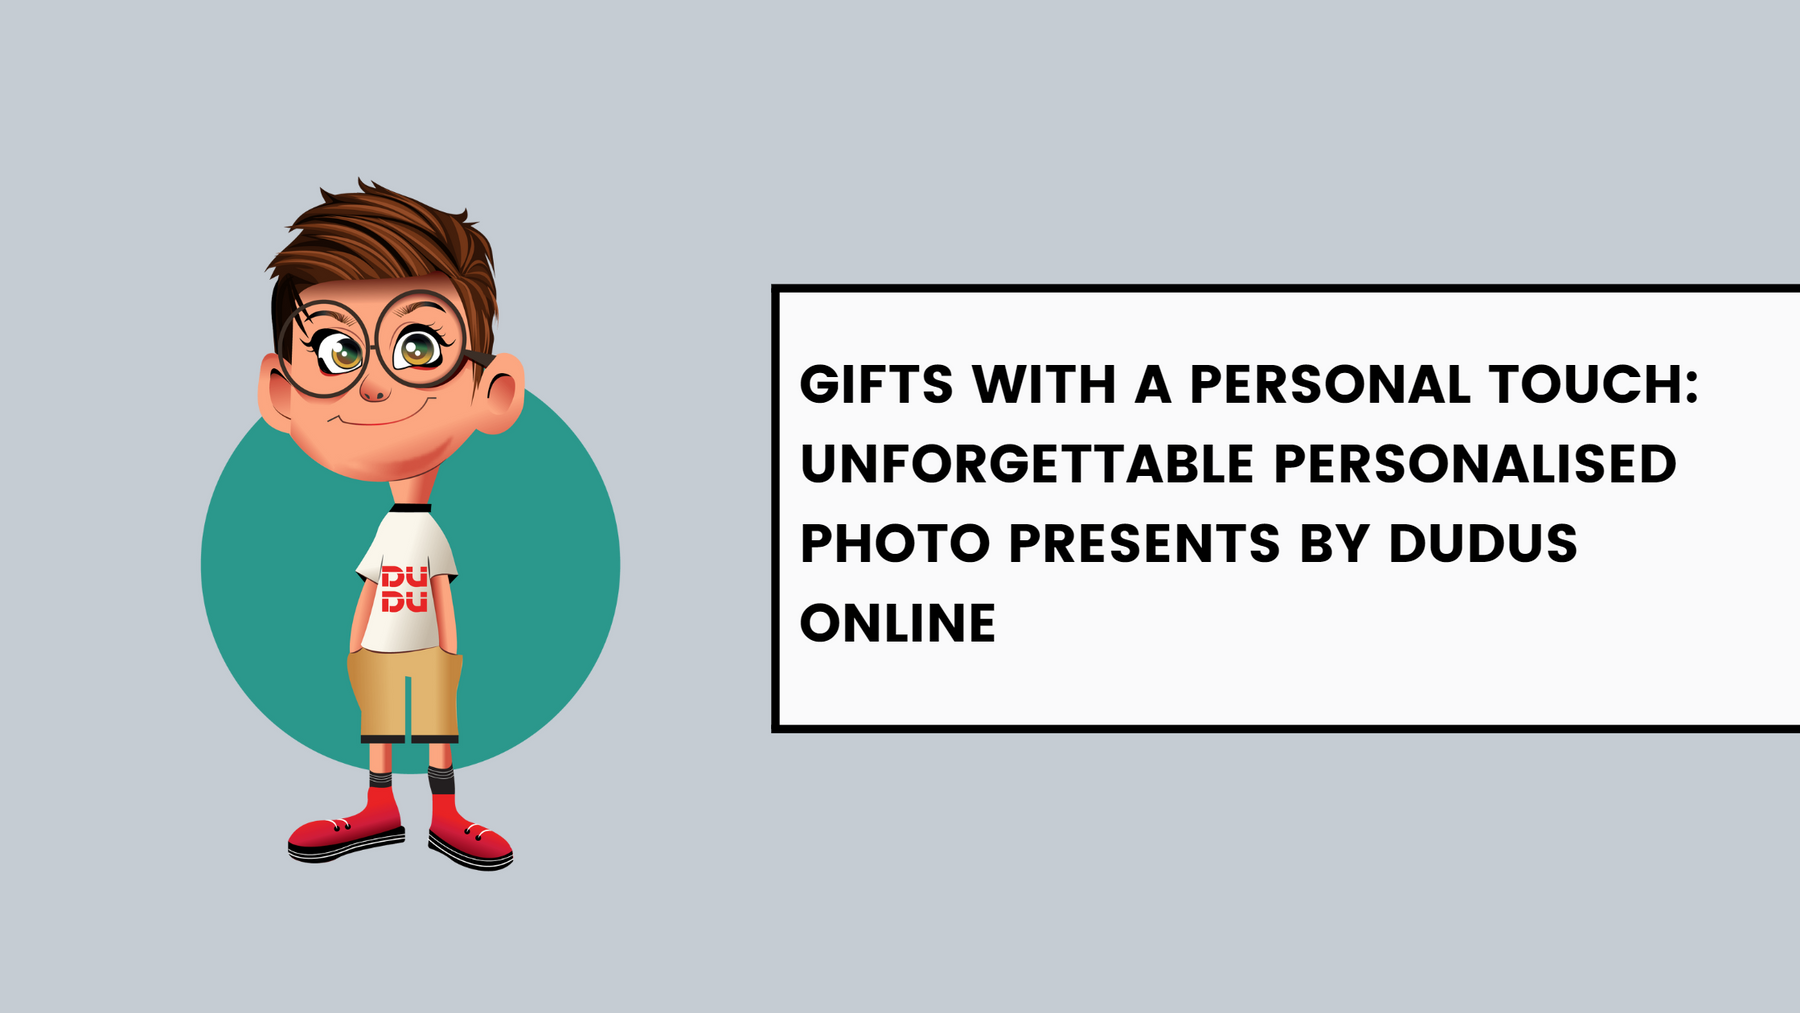 Gifts With A Personal Touch: Unforgettable Personalised Photo Presents By Dudus Online